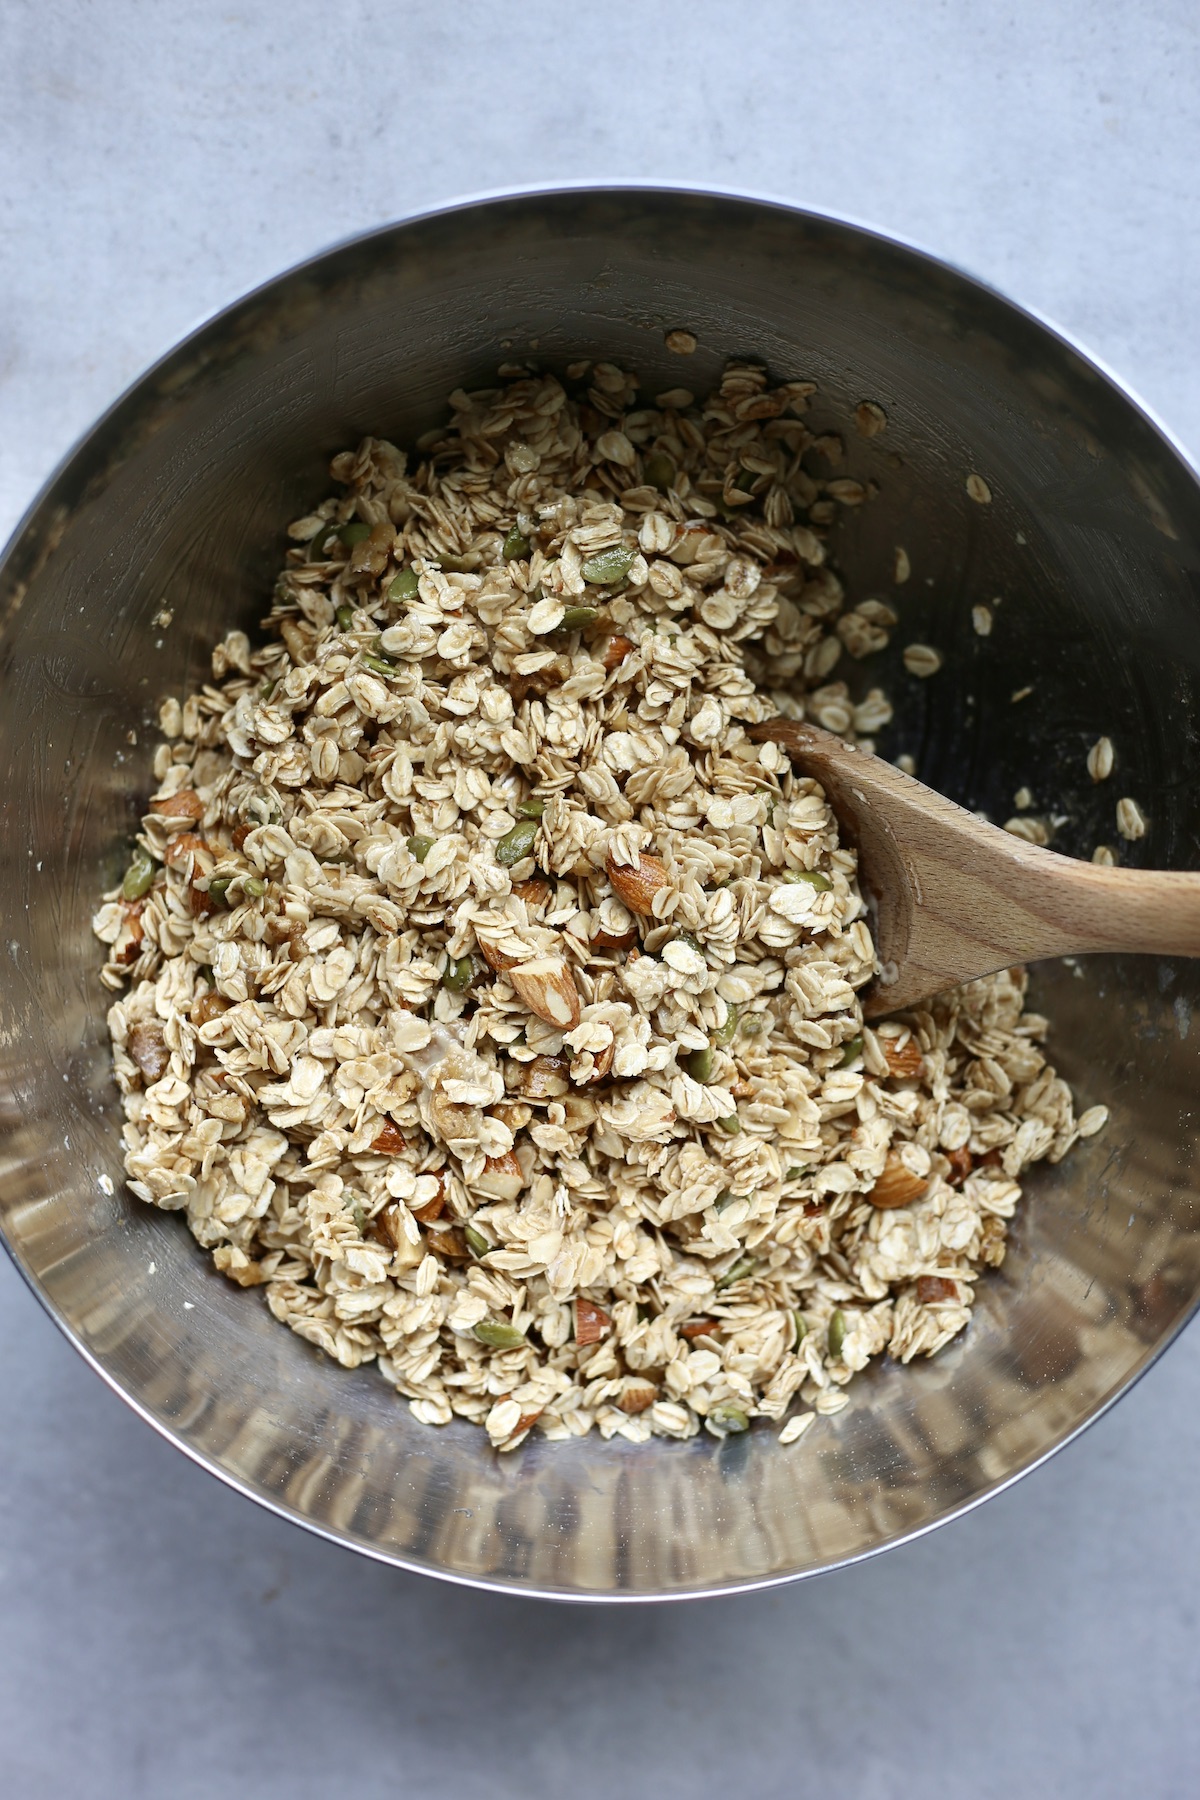 A wooden spoon stirring oats, nuts and seeds together in a mixing bowl for granola.